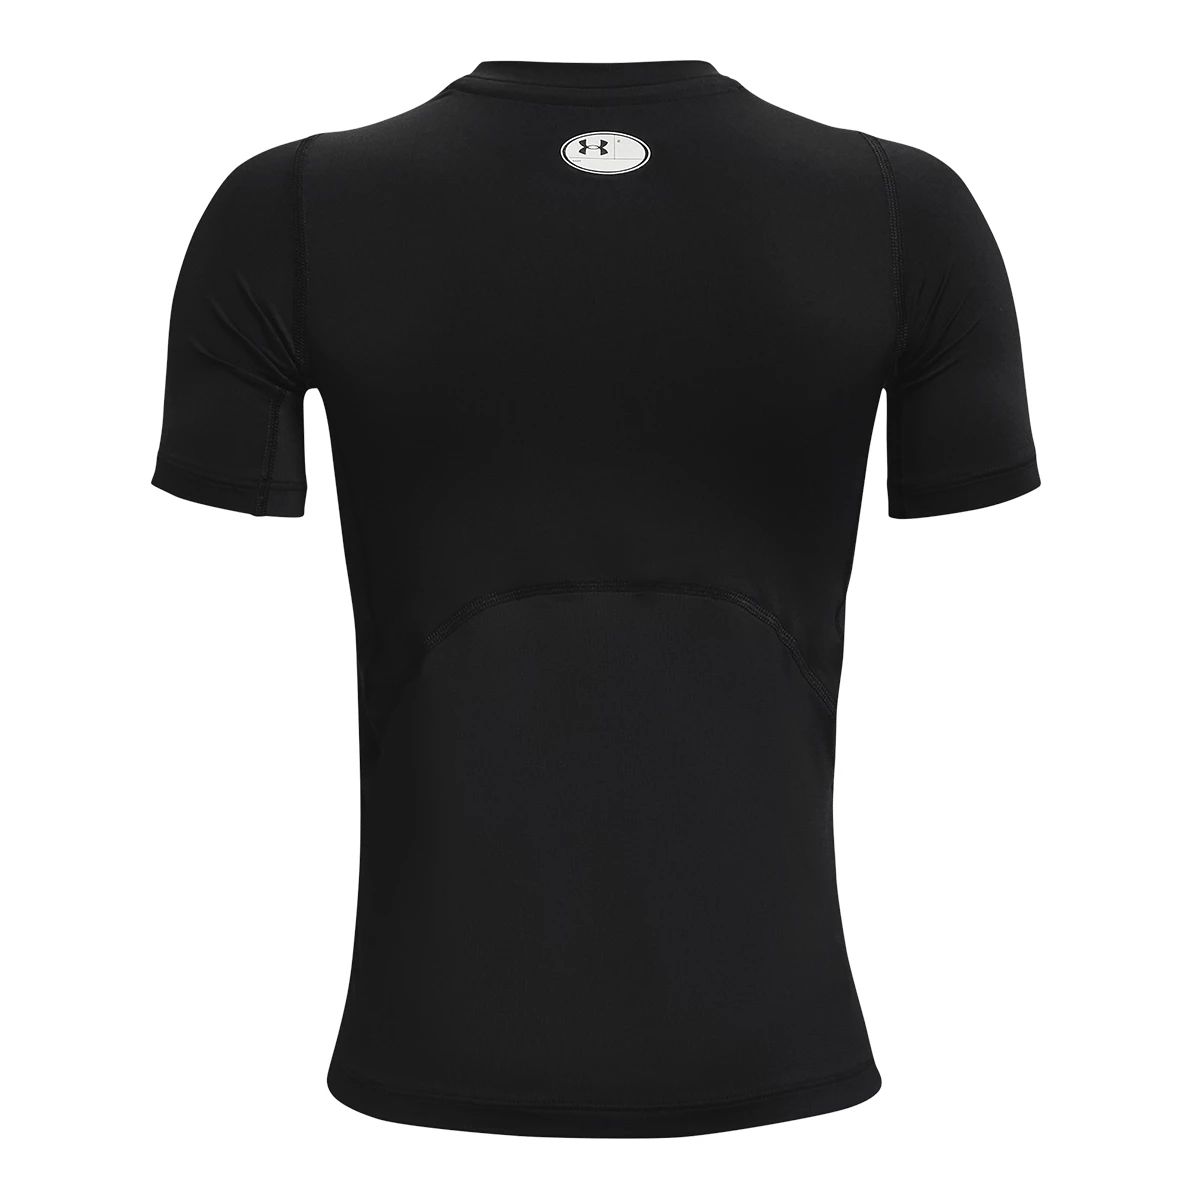 Under Armour HeatGear Black Printed Muscle Fit Training T-Shirt